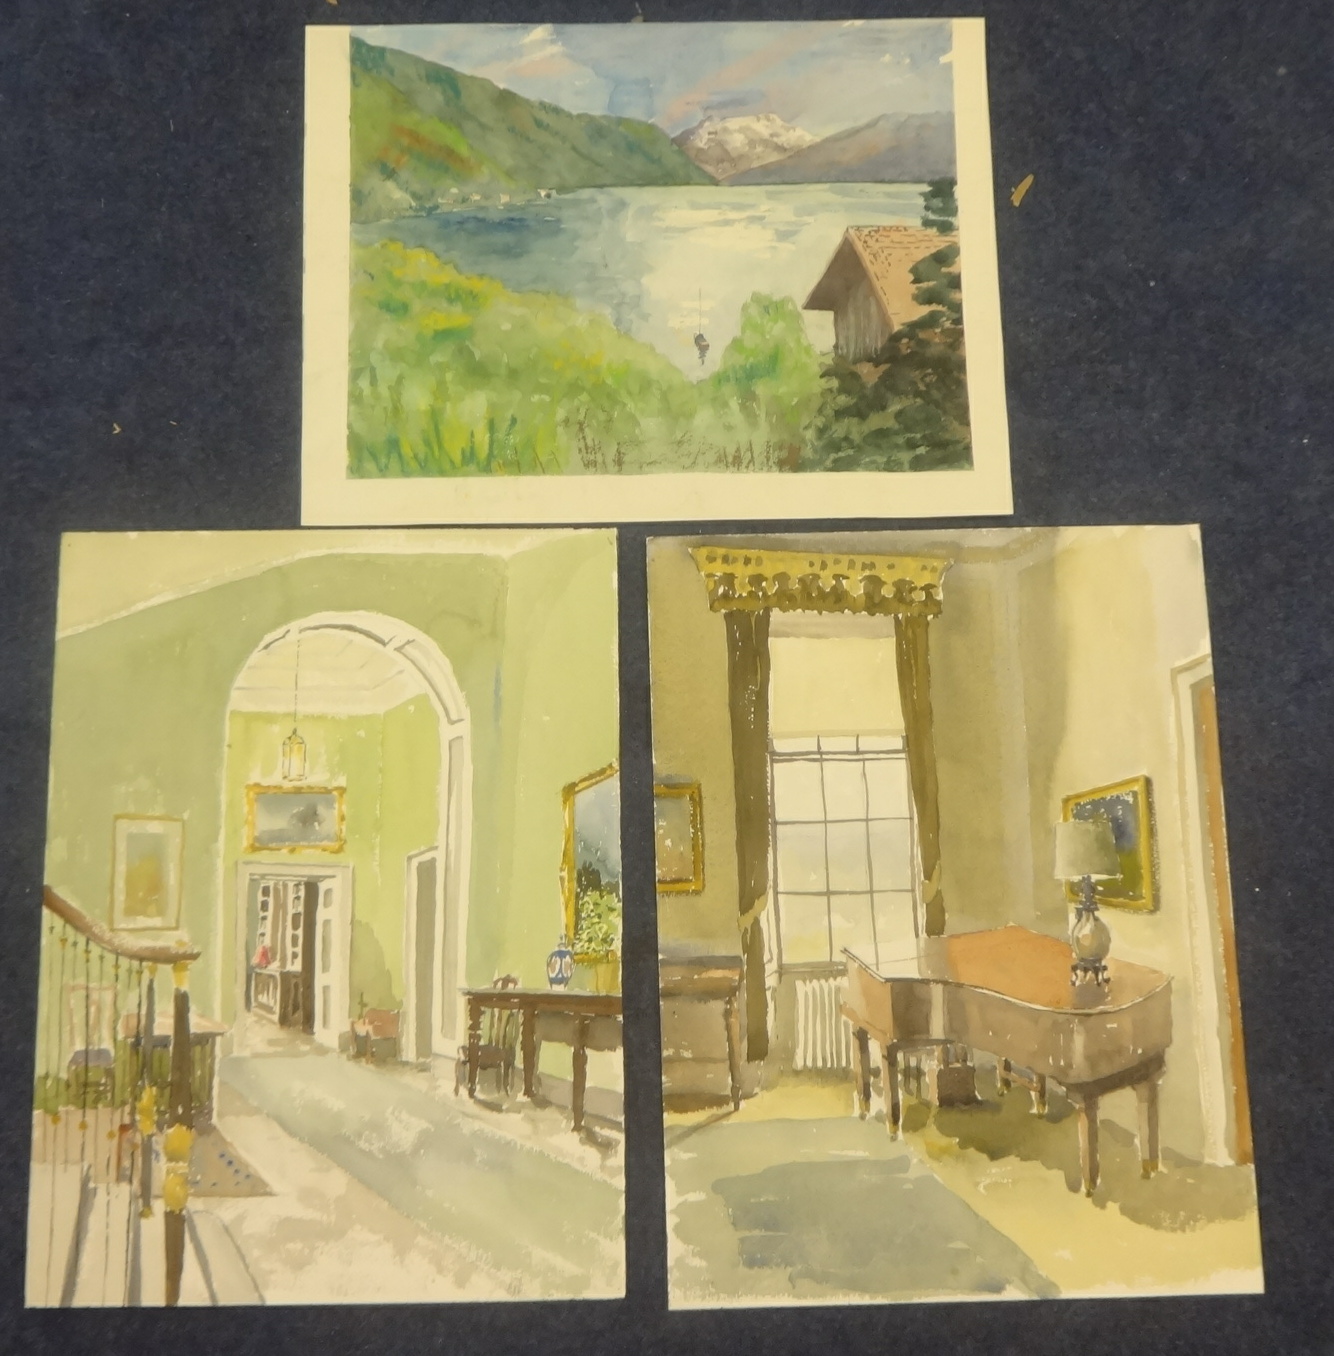 Malcom D. Mitchell, a large portfolio of watercolour paintings and sketches, circa 1960's to 2000's,